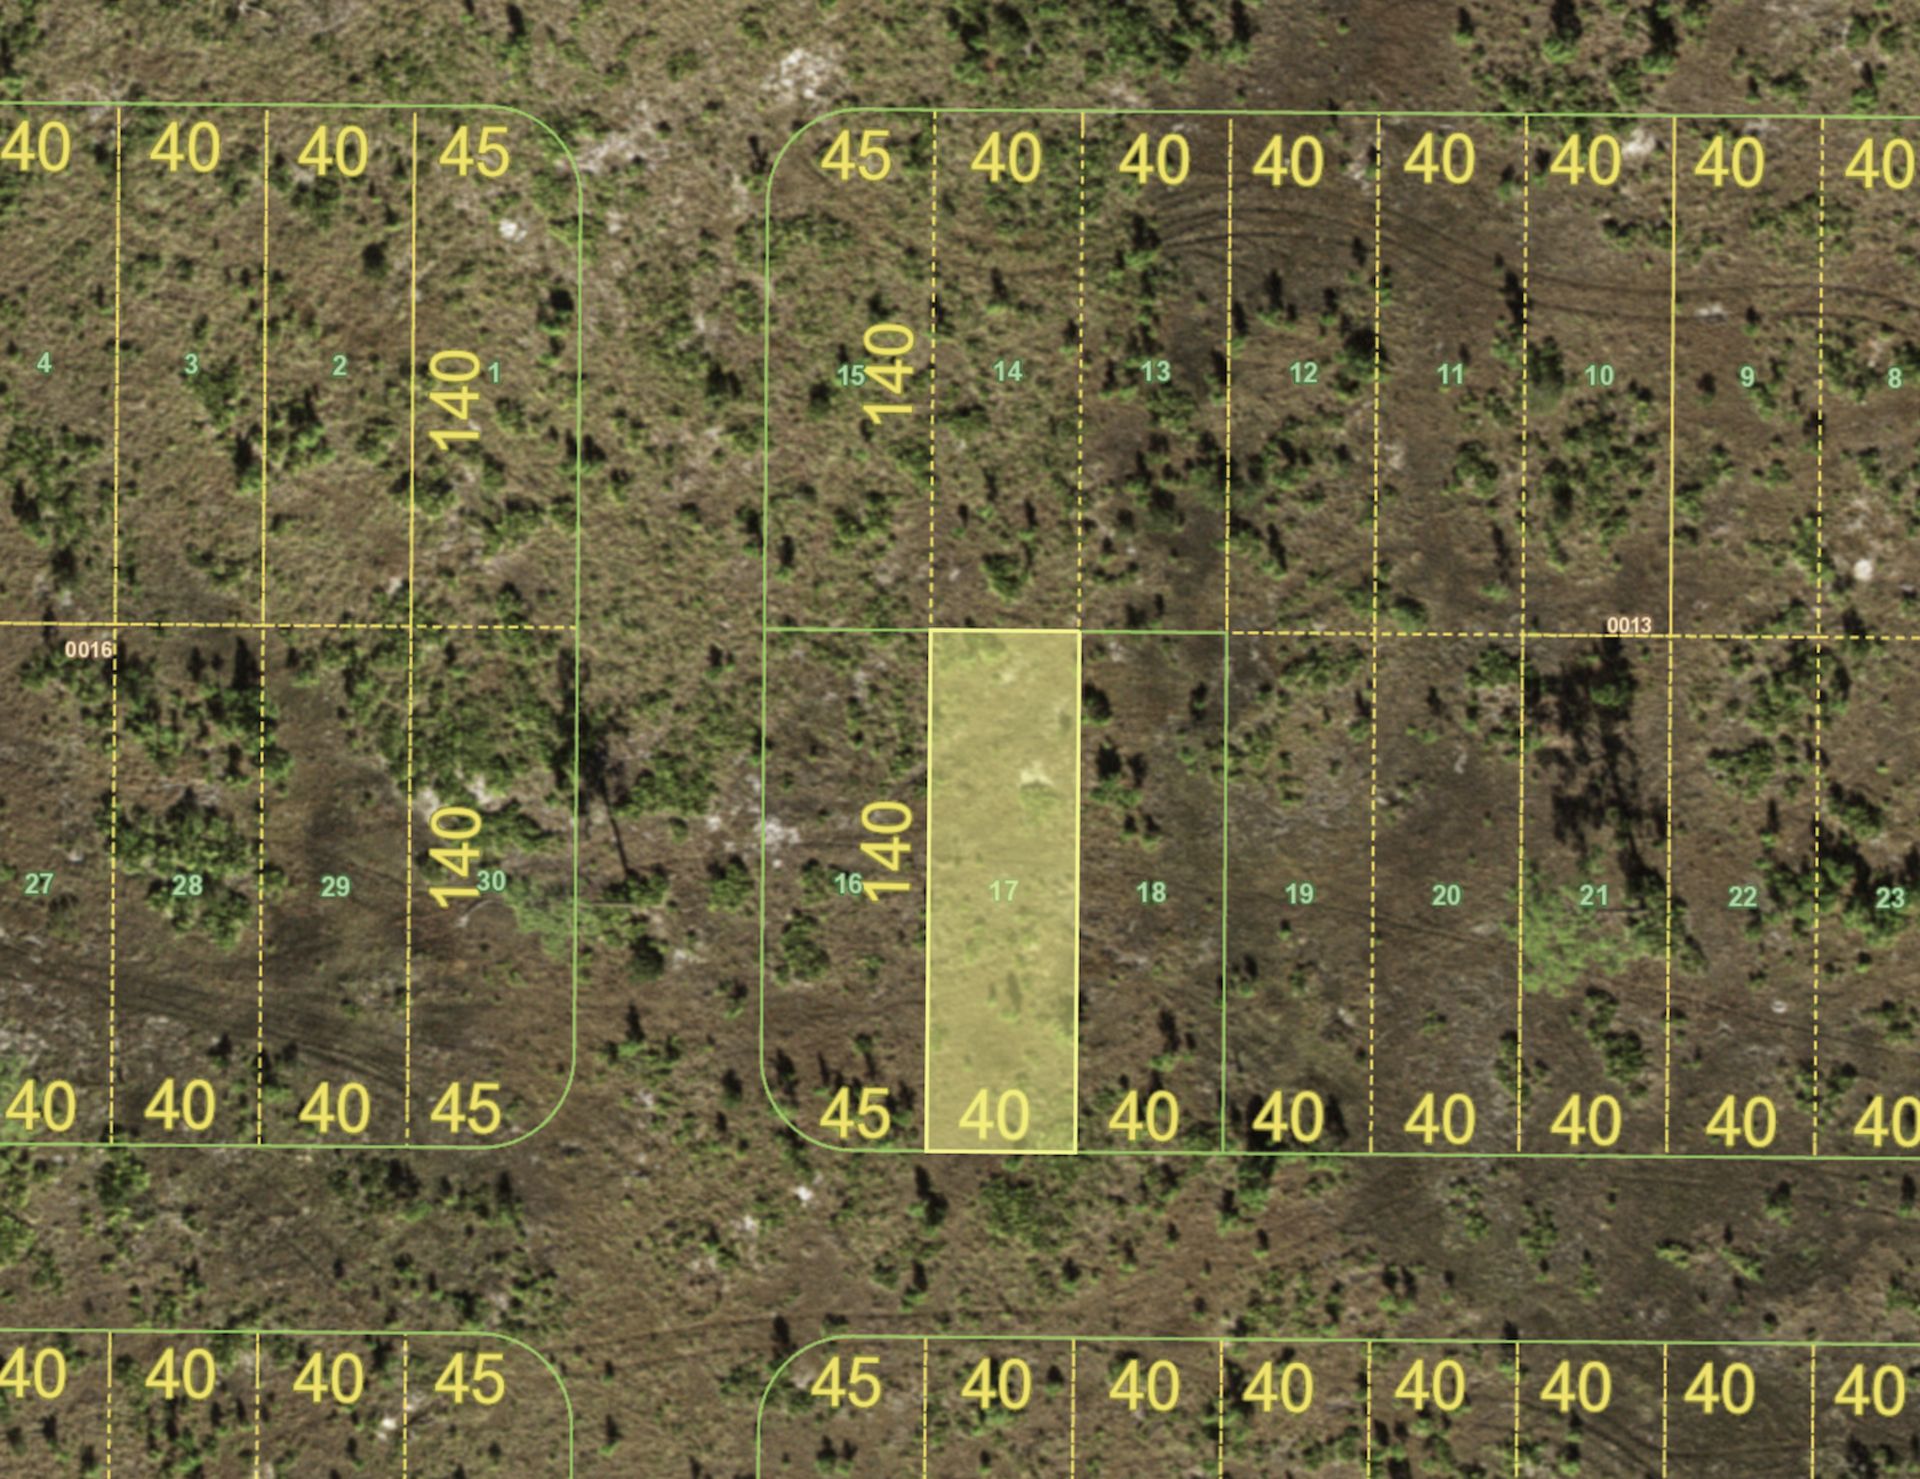 Prime Plot in Charlotte County, Florida: Your Slice of Sunshine! - Image 8 of 10